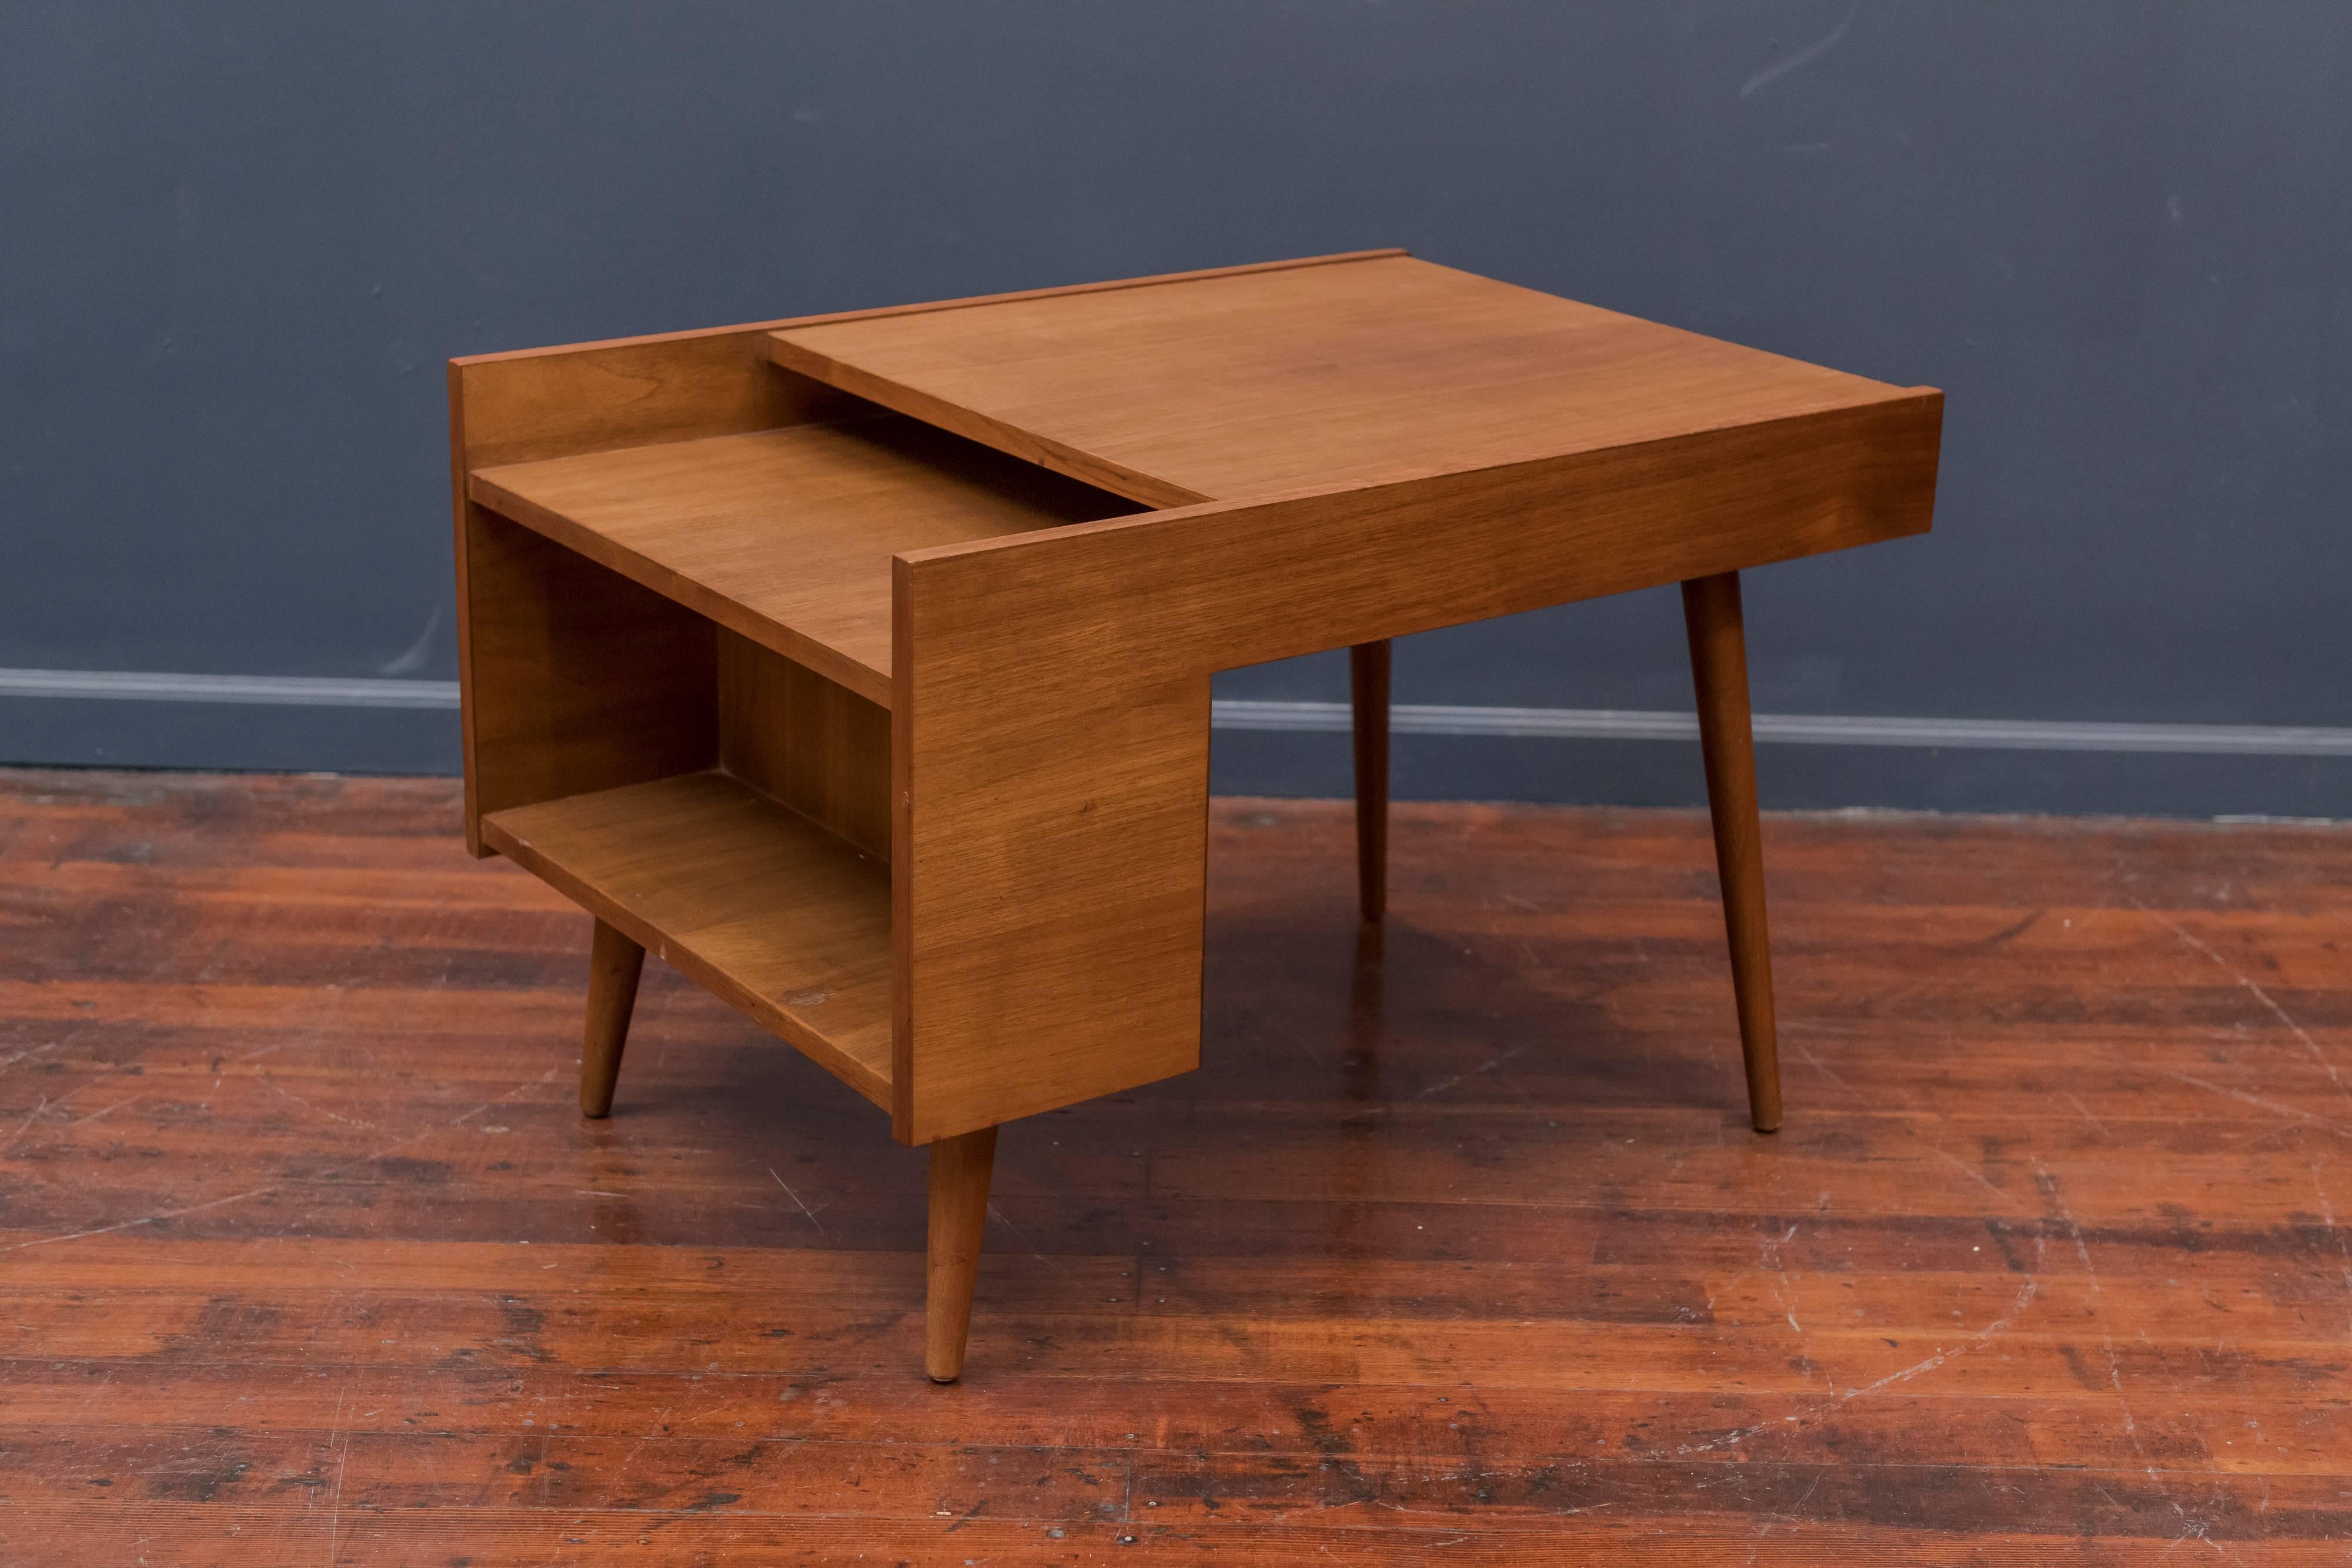 Milo Baughman design end table for Glenn of California with a magazine shelf and book cubby. Minimal modern walnut table in very good original condition.